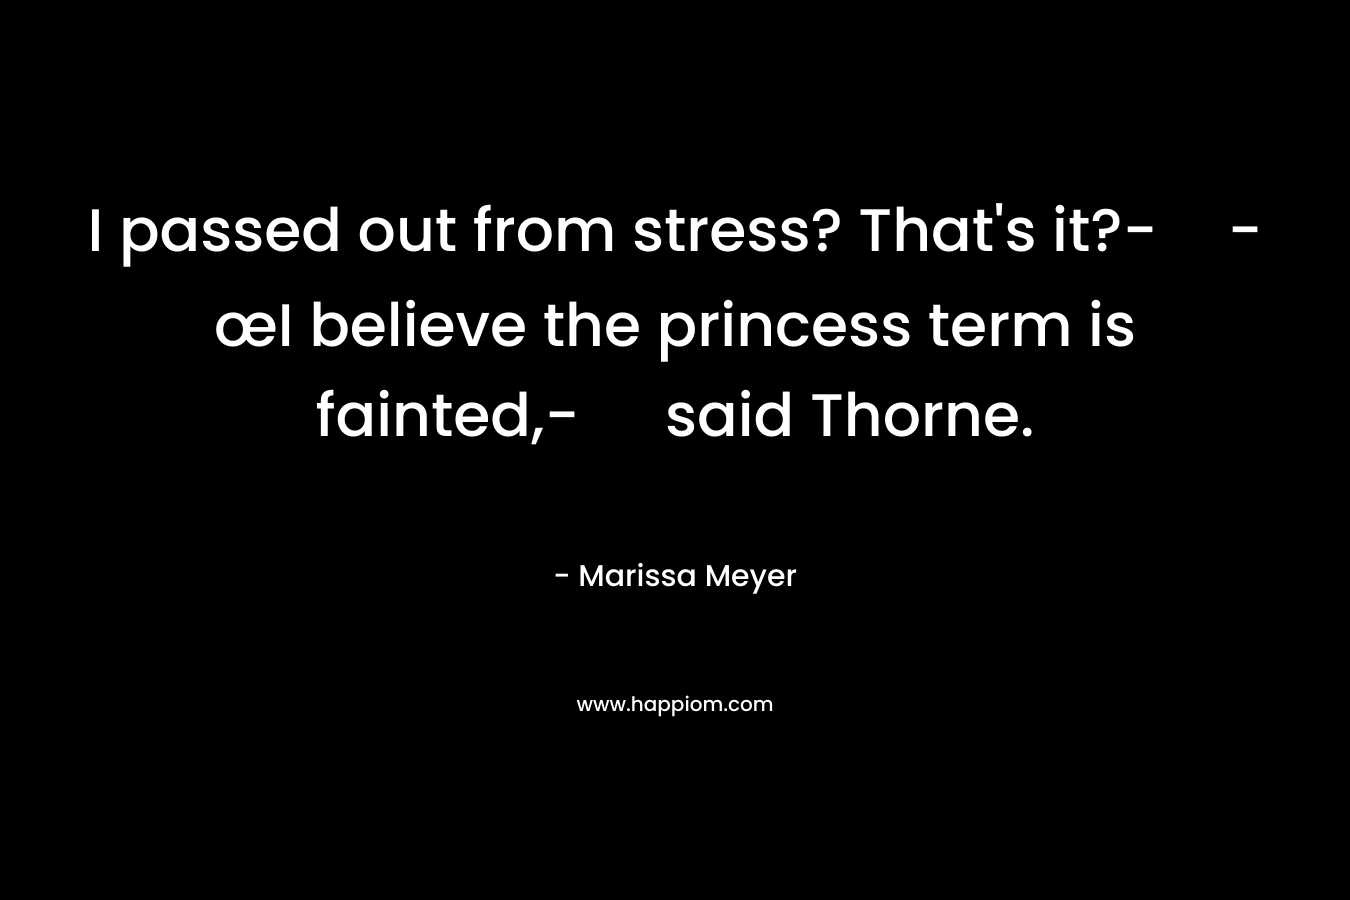 I passed out from stress? That's it?--œI believe the princess term is fainted,- said Thorne.